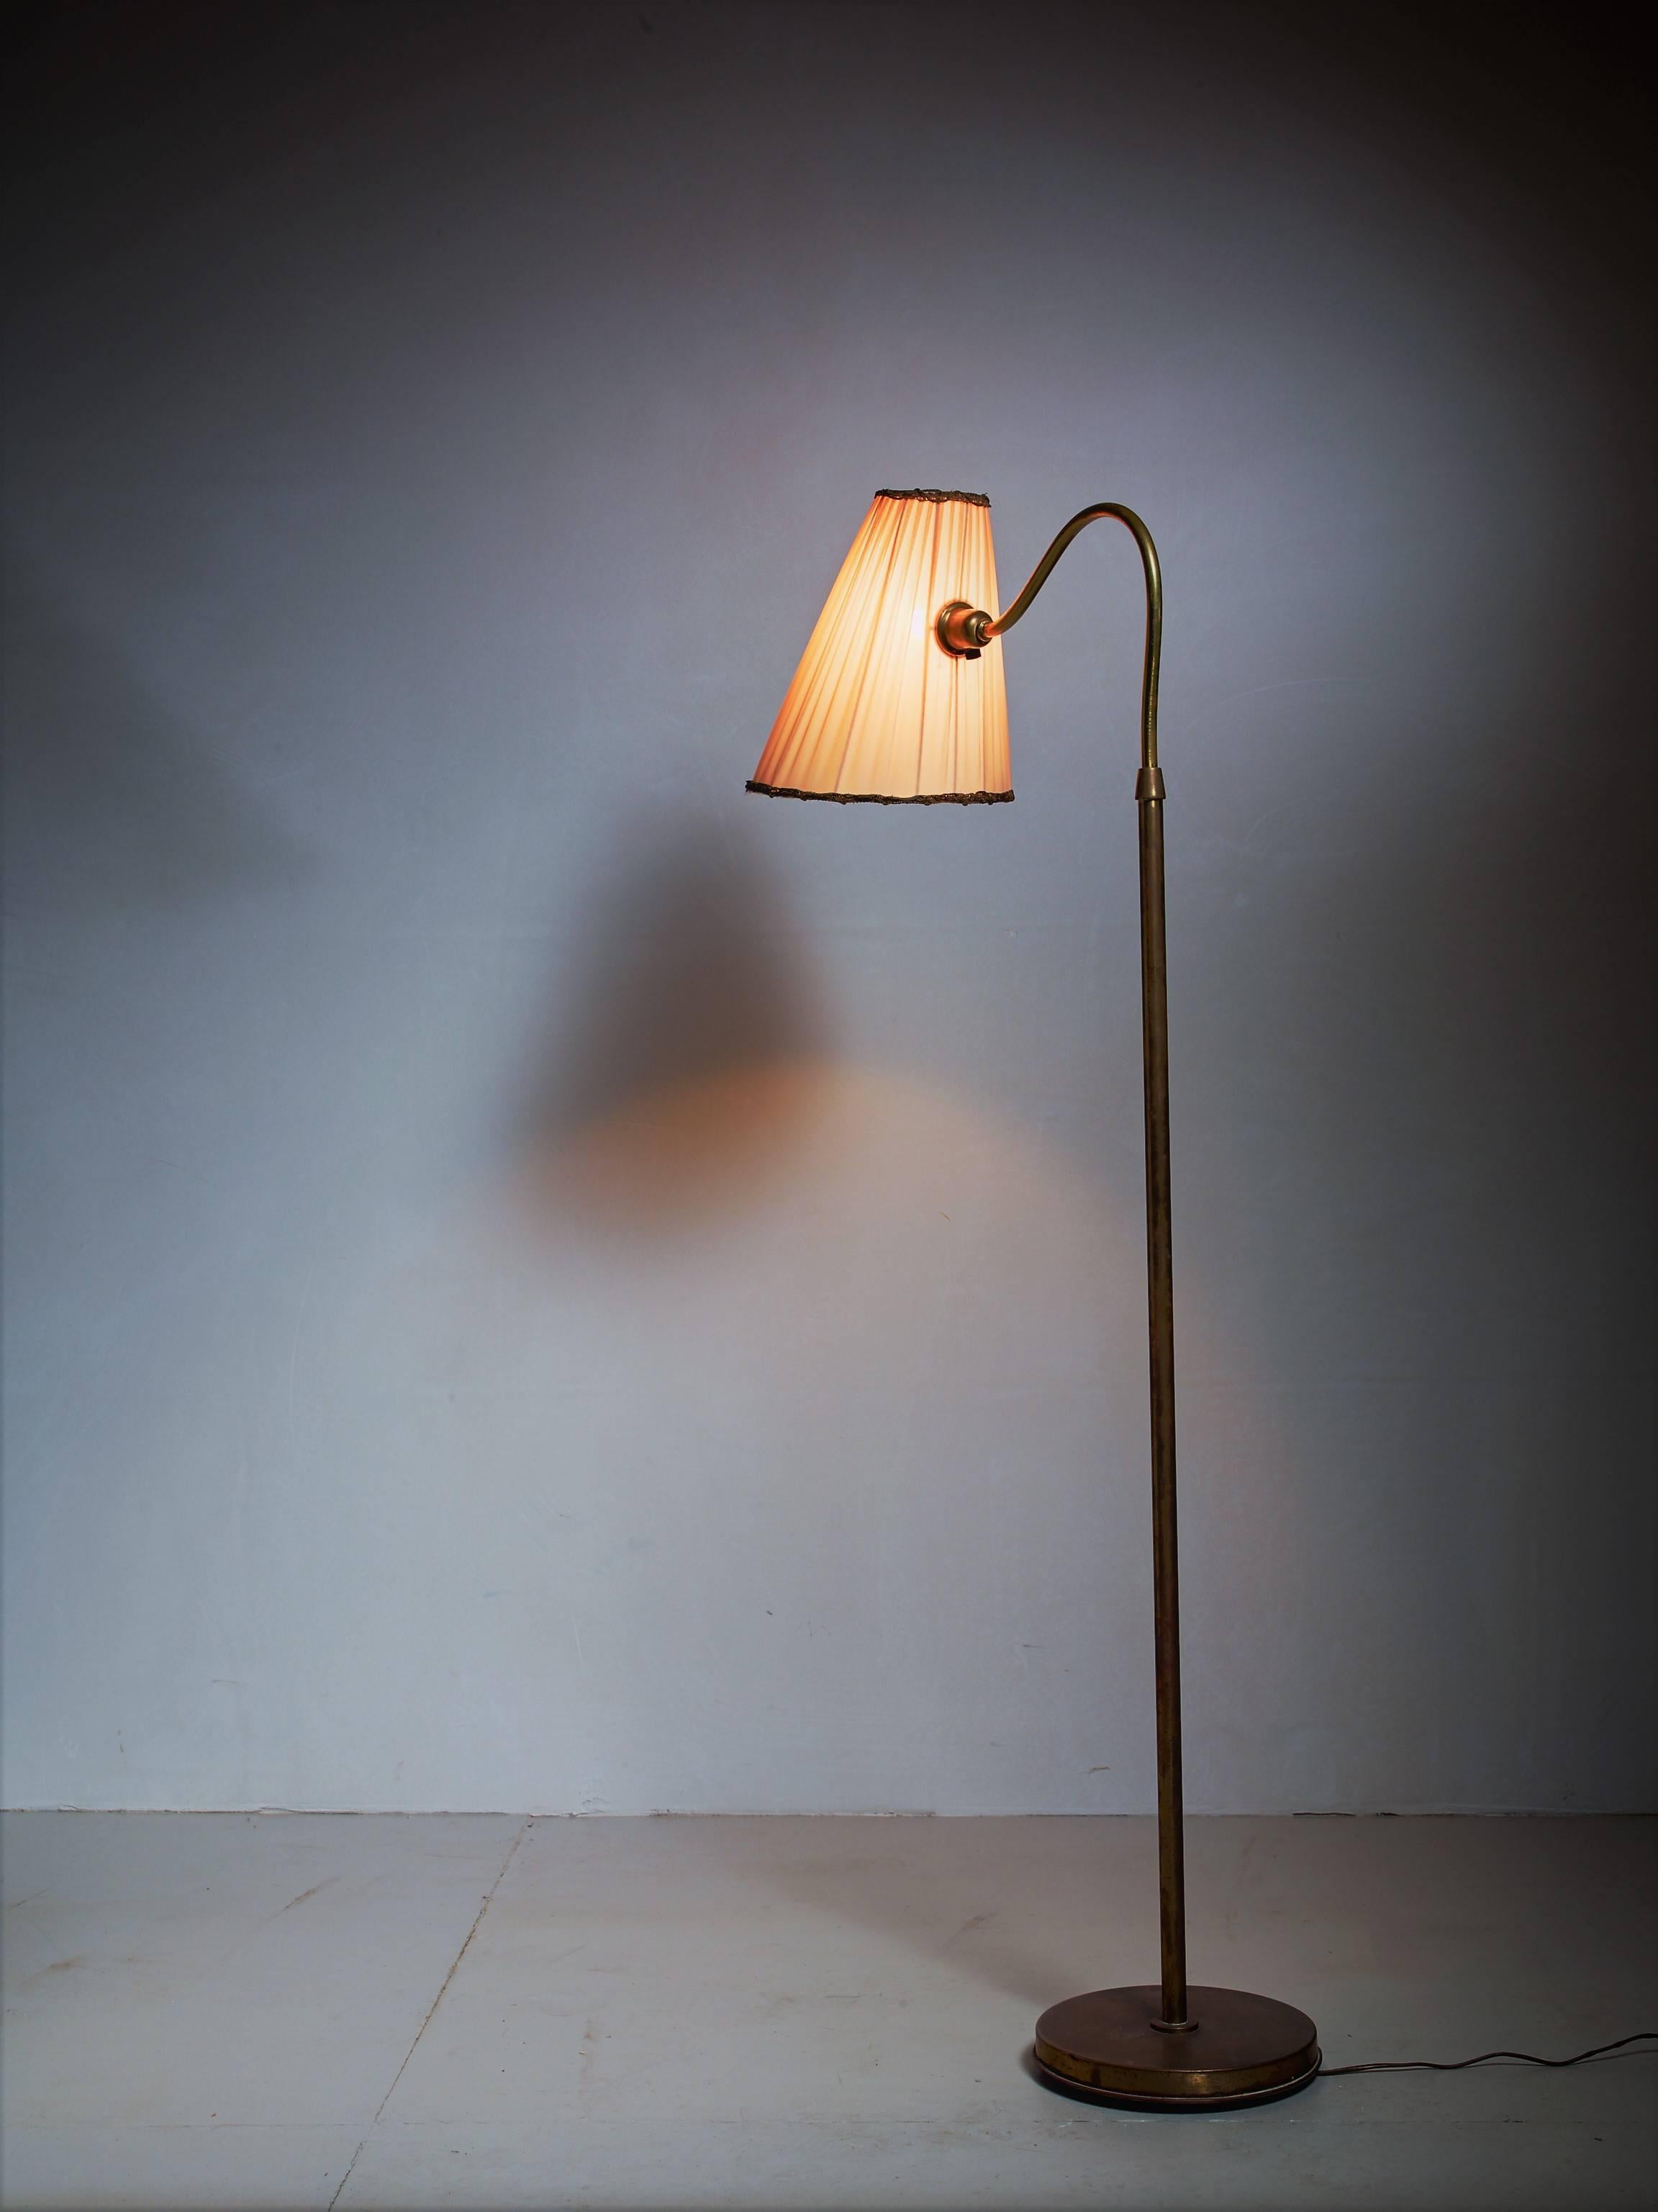 A Swedish floor lamp from the 1940s. The lamp has a brass stem with a curved neck and a fabric shade.
Marked by 'B.E.M.'.
